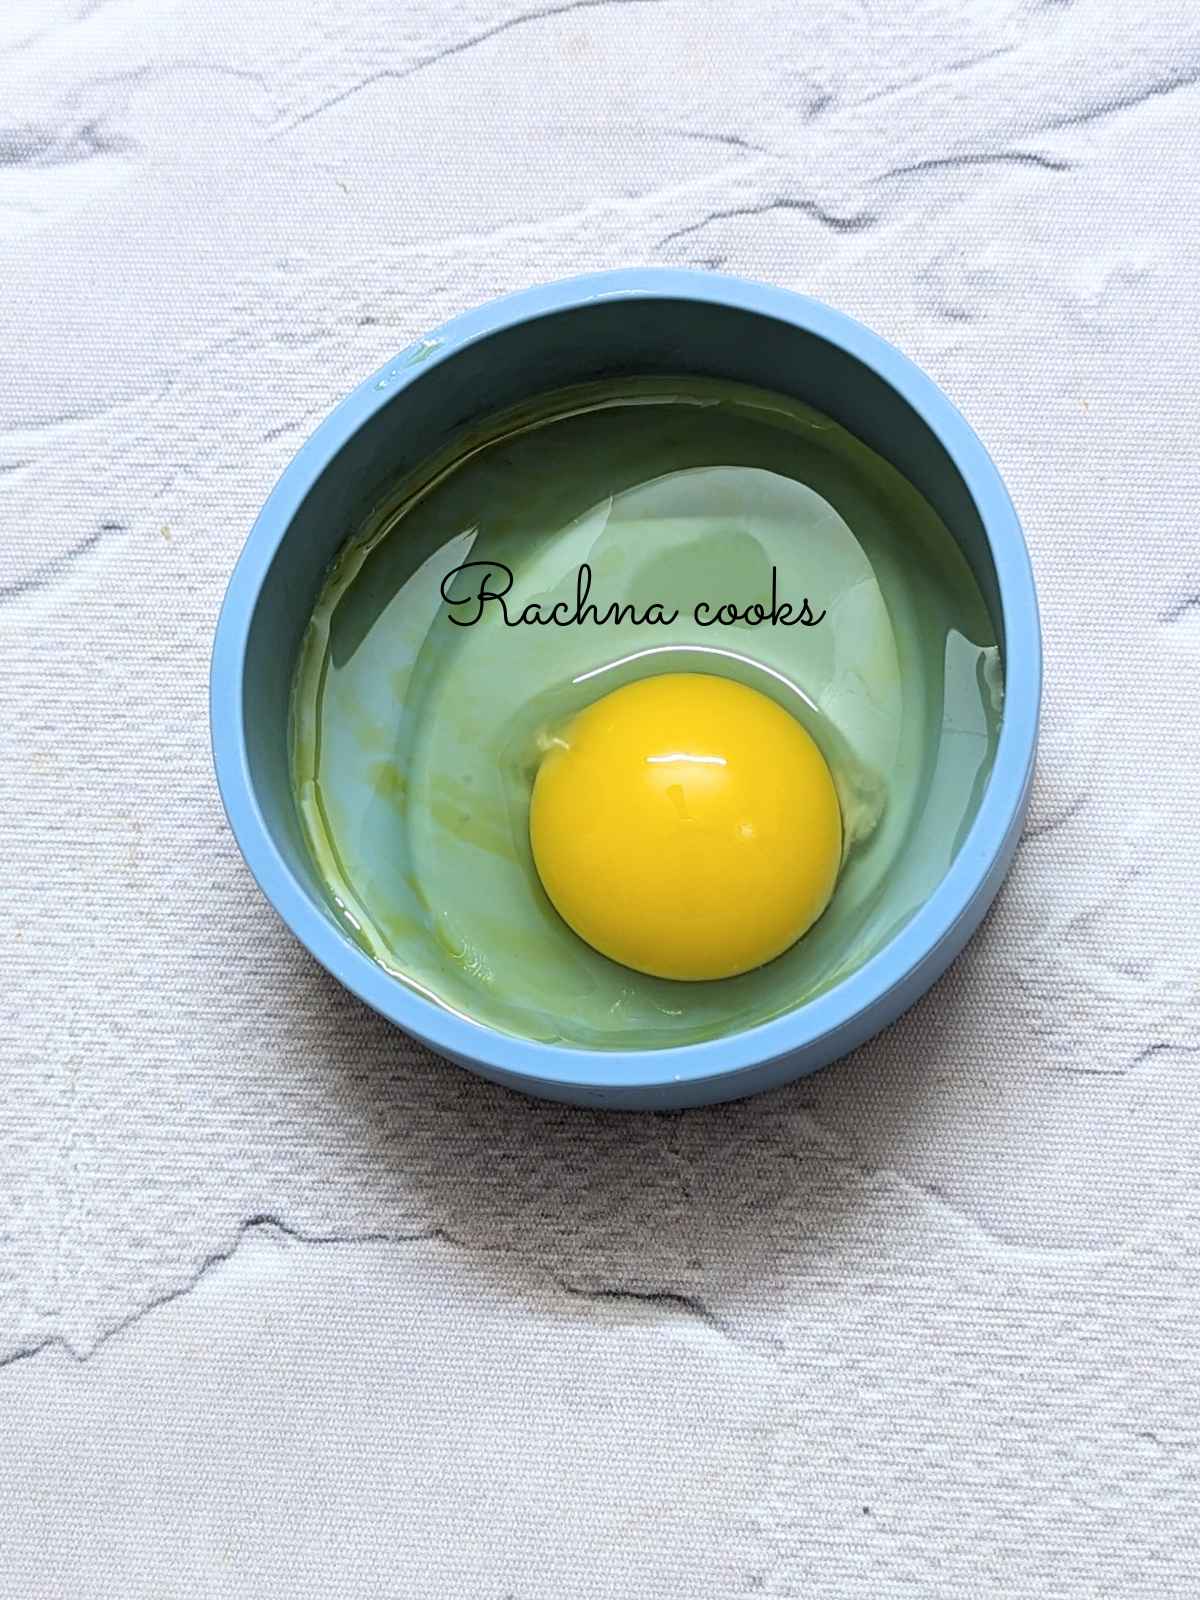 Cracked egg inside an oiled silicone mold.